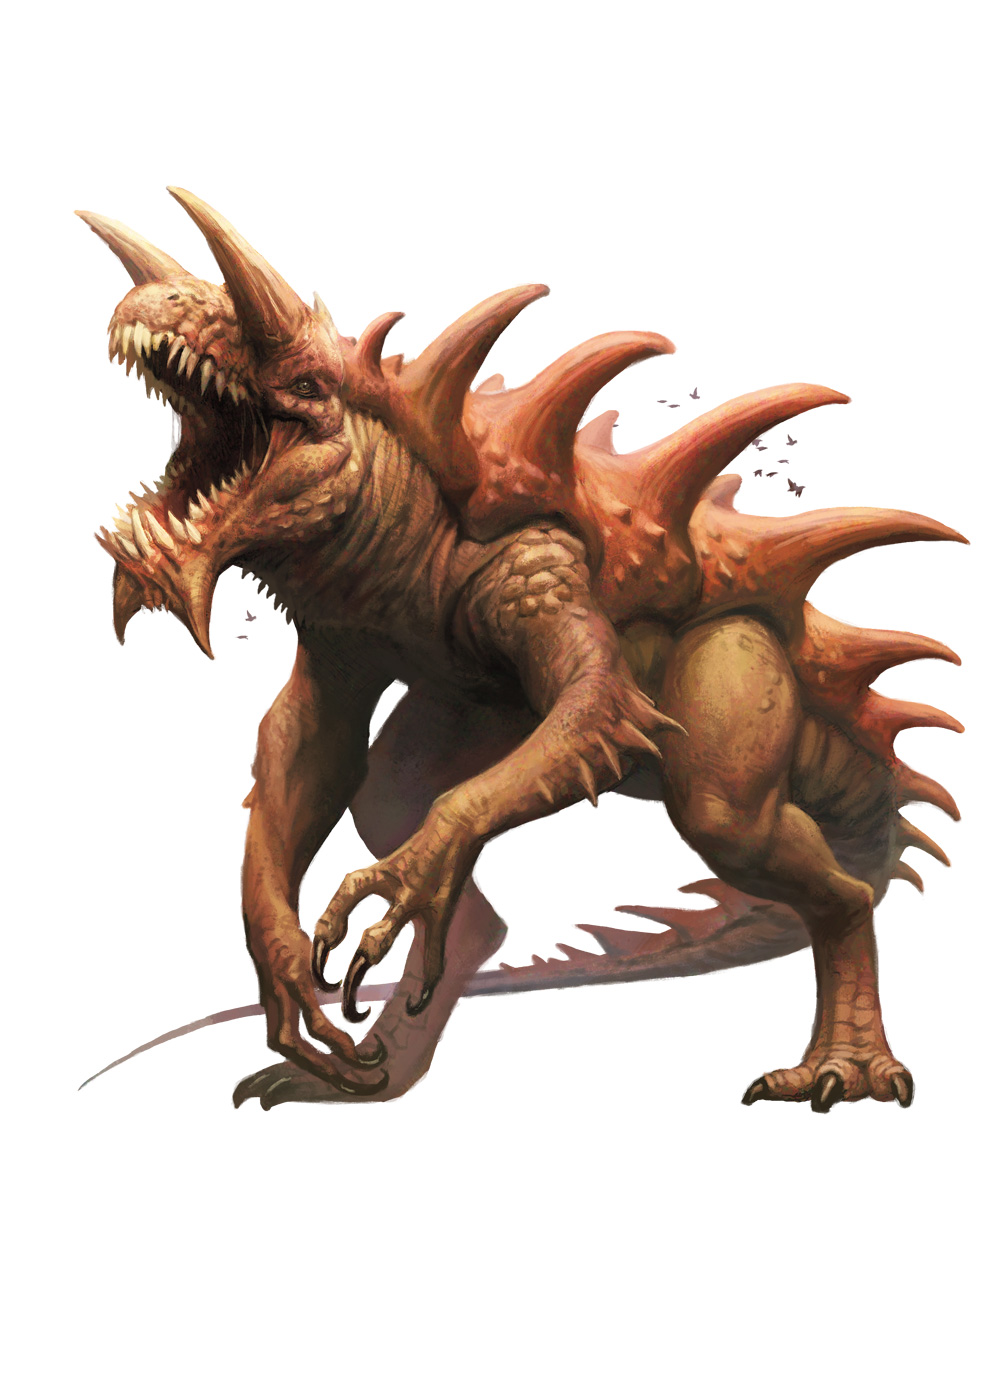 Tarrasque Forgotten Realms Powered By Wikia